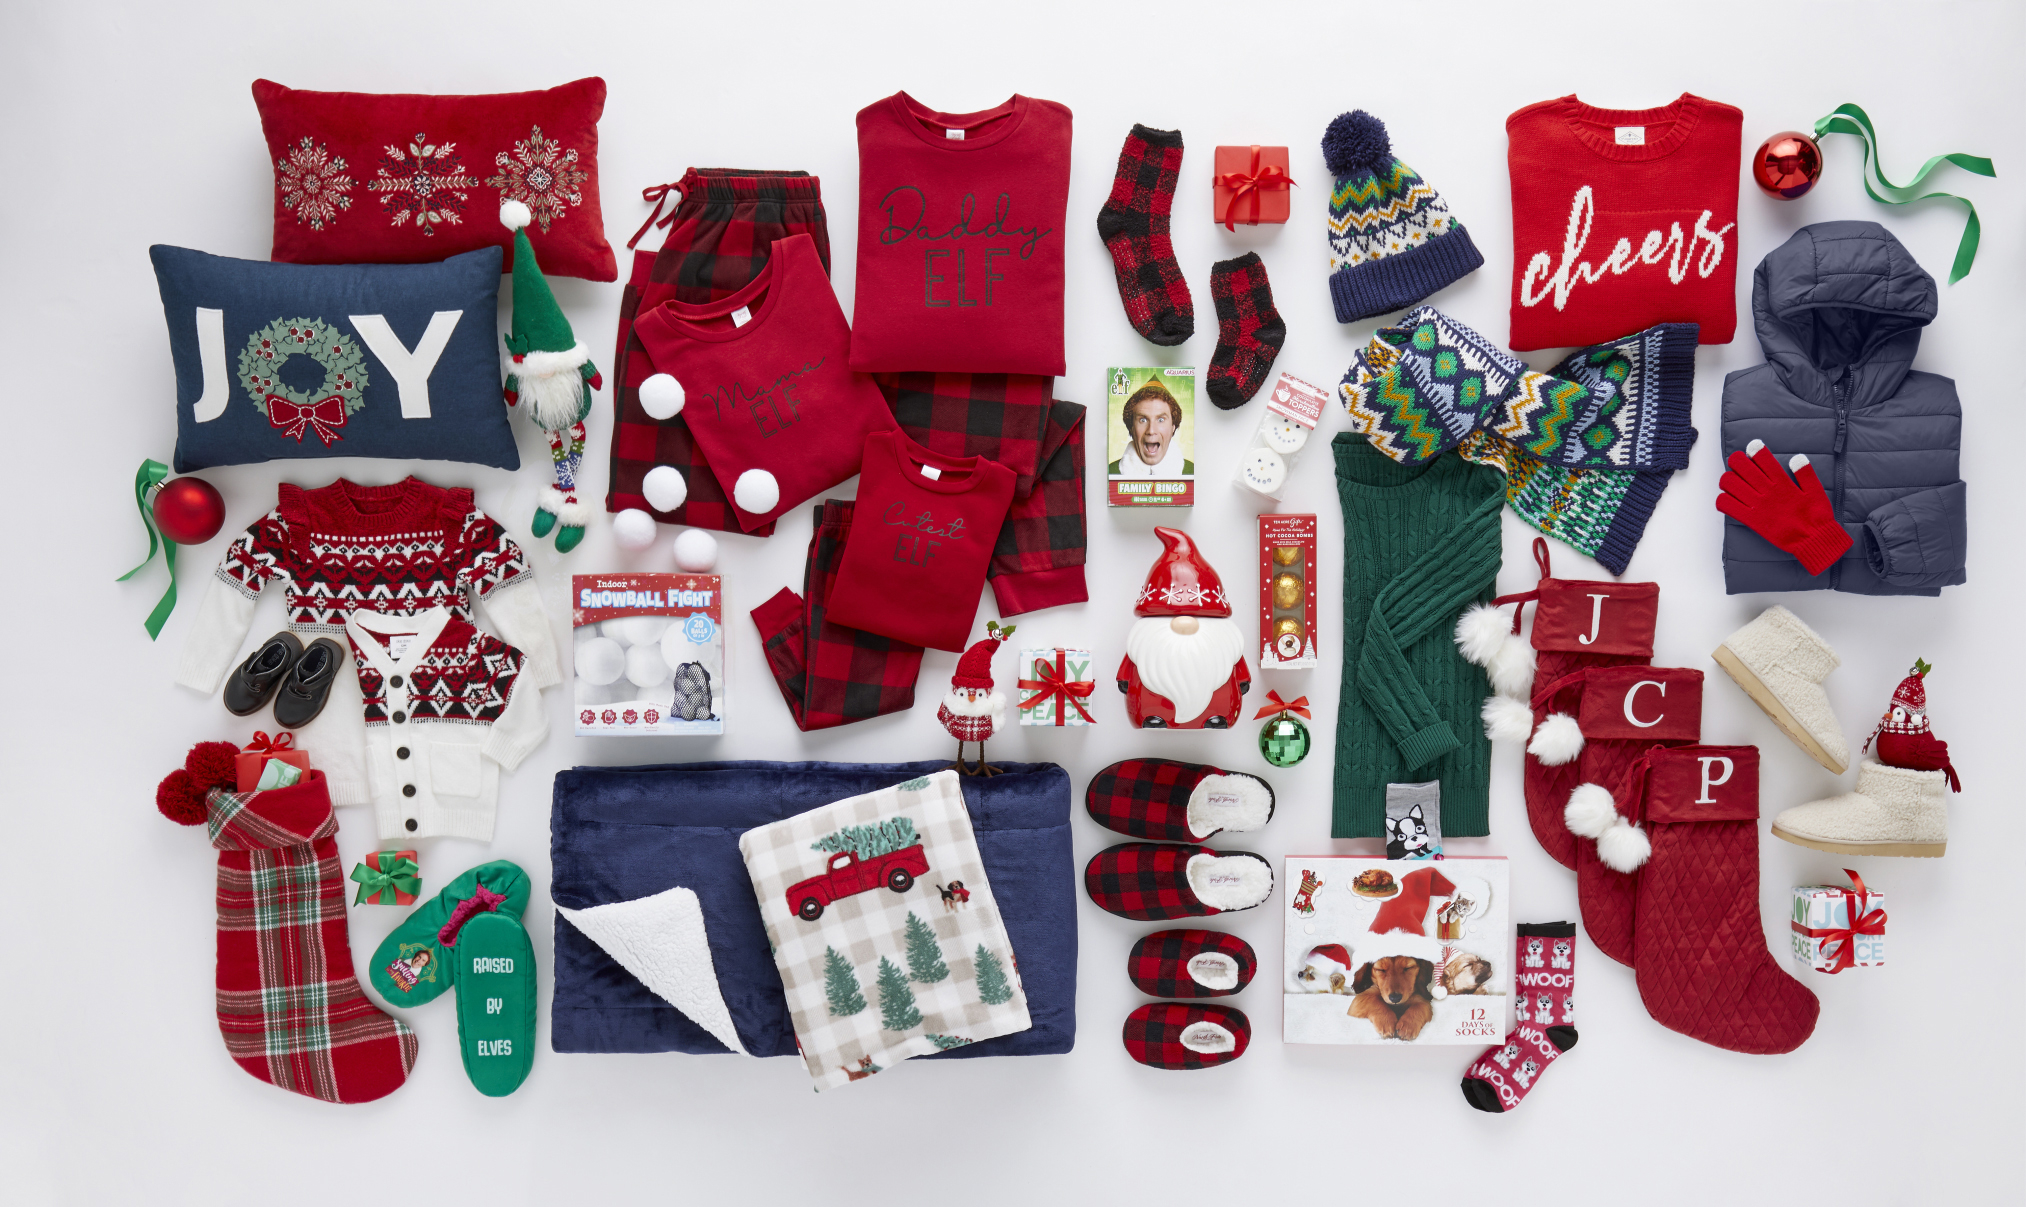 We Got Your Holiday”: JCPenney is Making the Holidays Easier for Busy  Families with Inflation-Busting Early Black Friday Deals, Creative Gifting  Solutions and Festive Family Entertainment